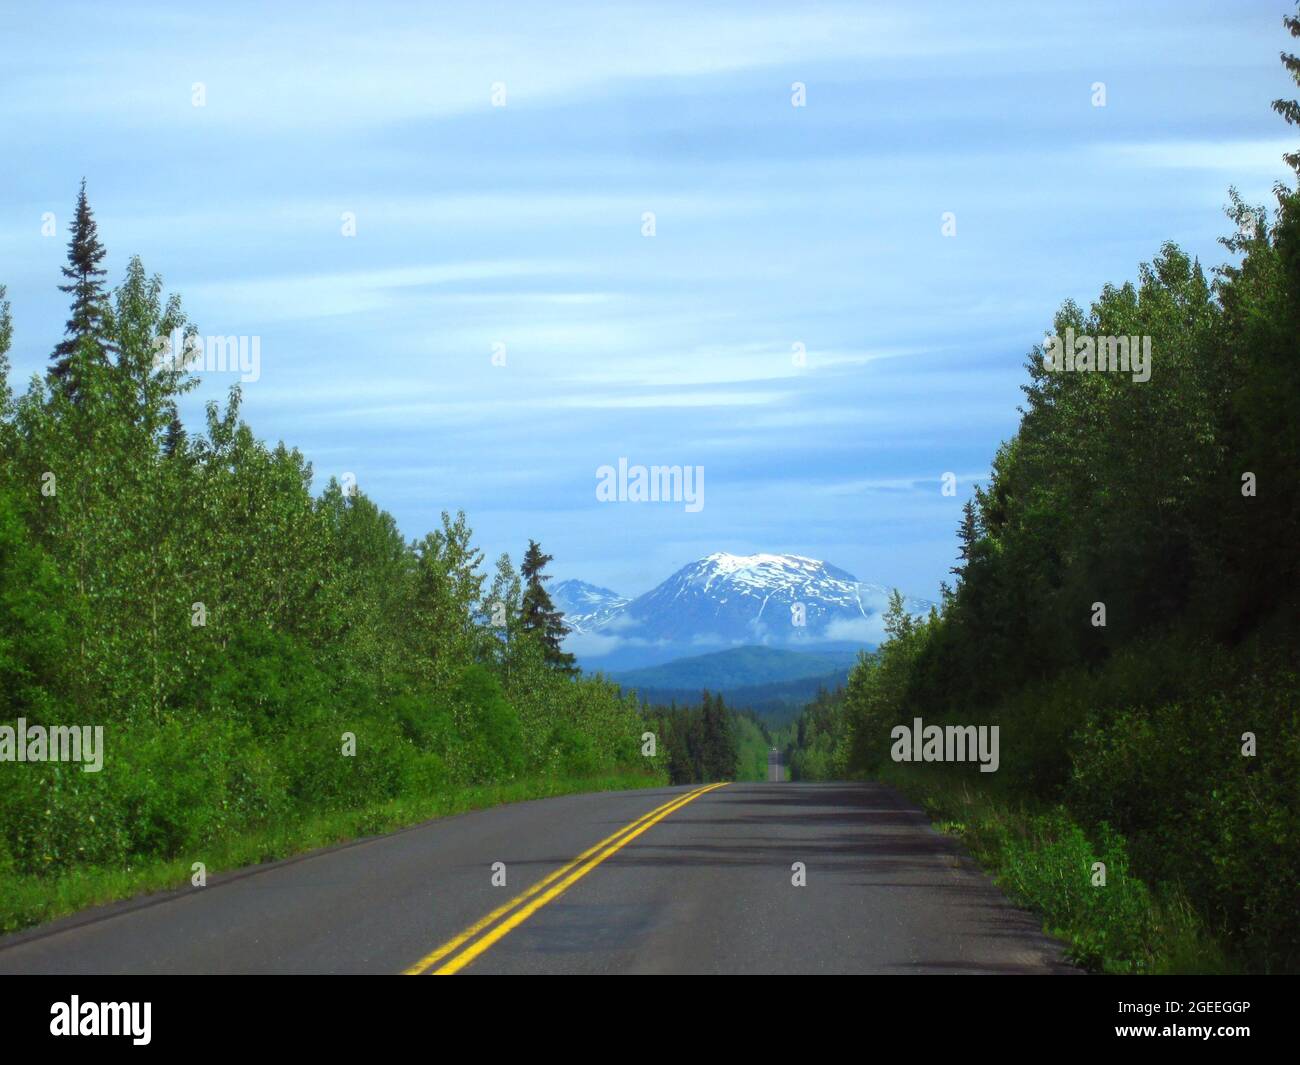 Alaskan highway continues toward snow capped mountain in the distance.  Car with headlights on traverses highway. Stock Photo